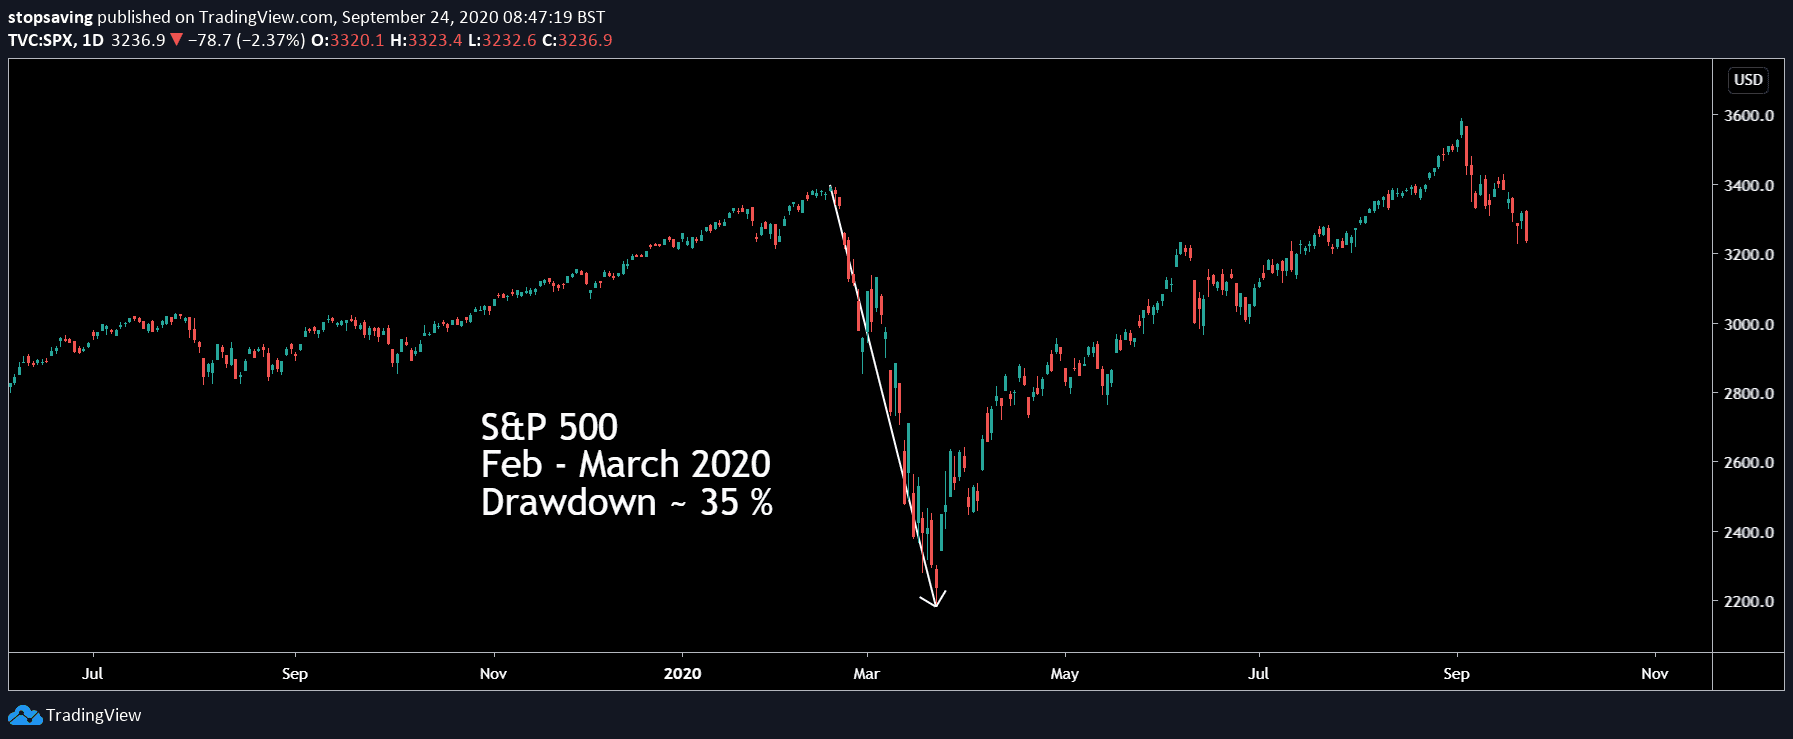 Chart showing the loss of the S&P 500